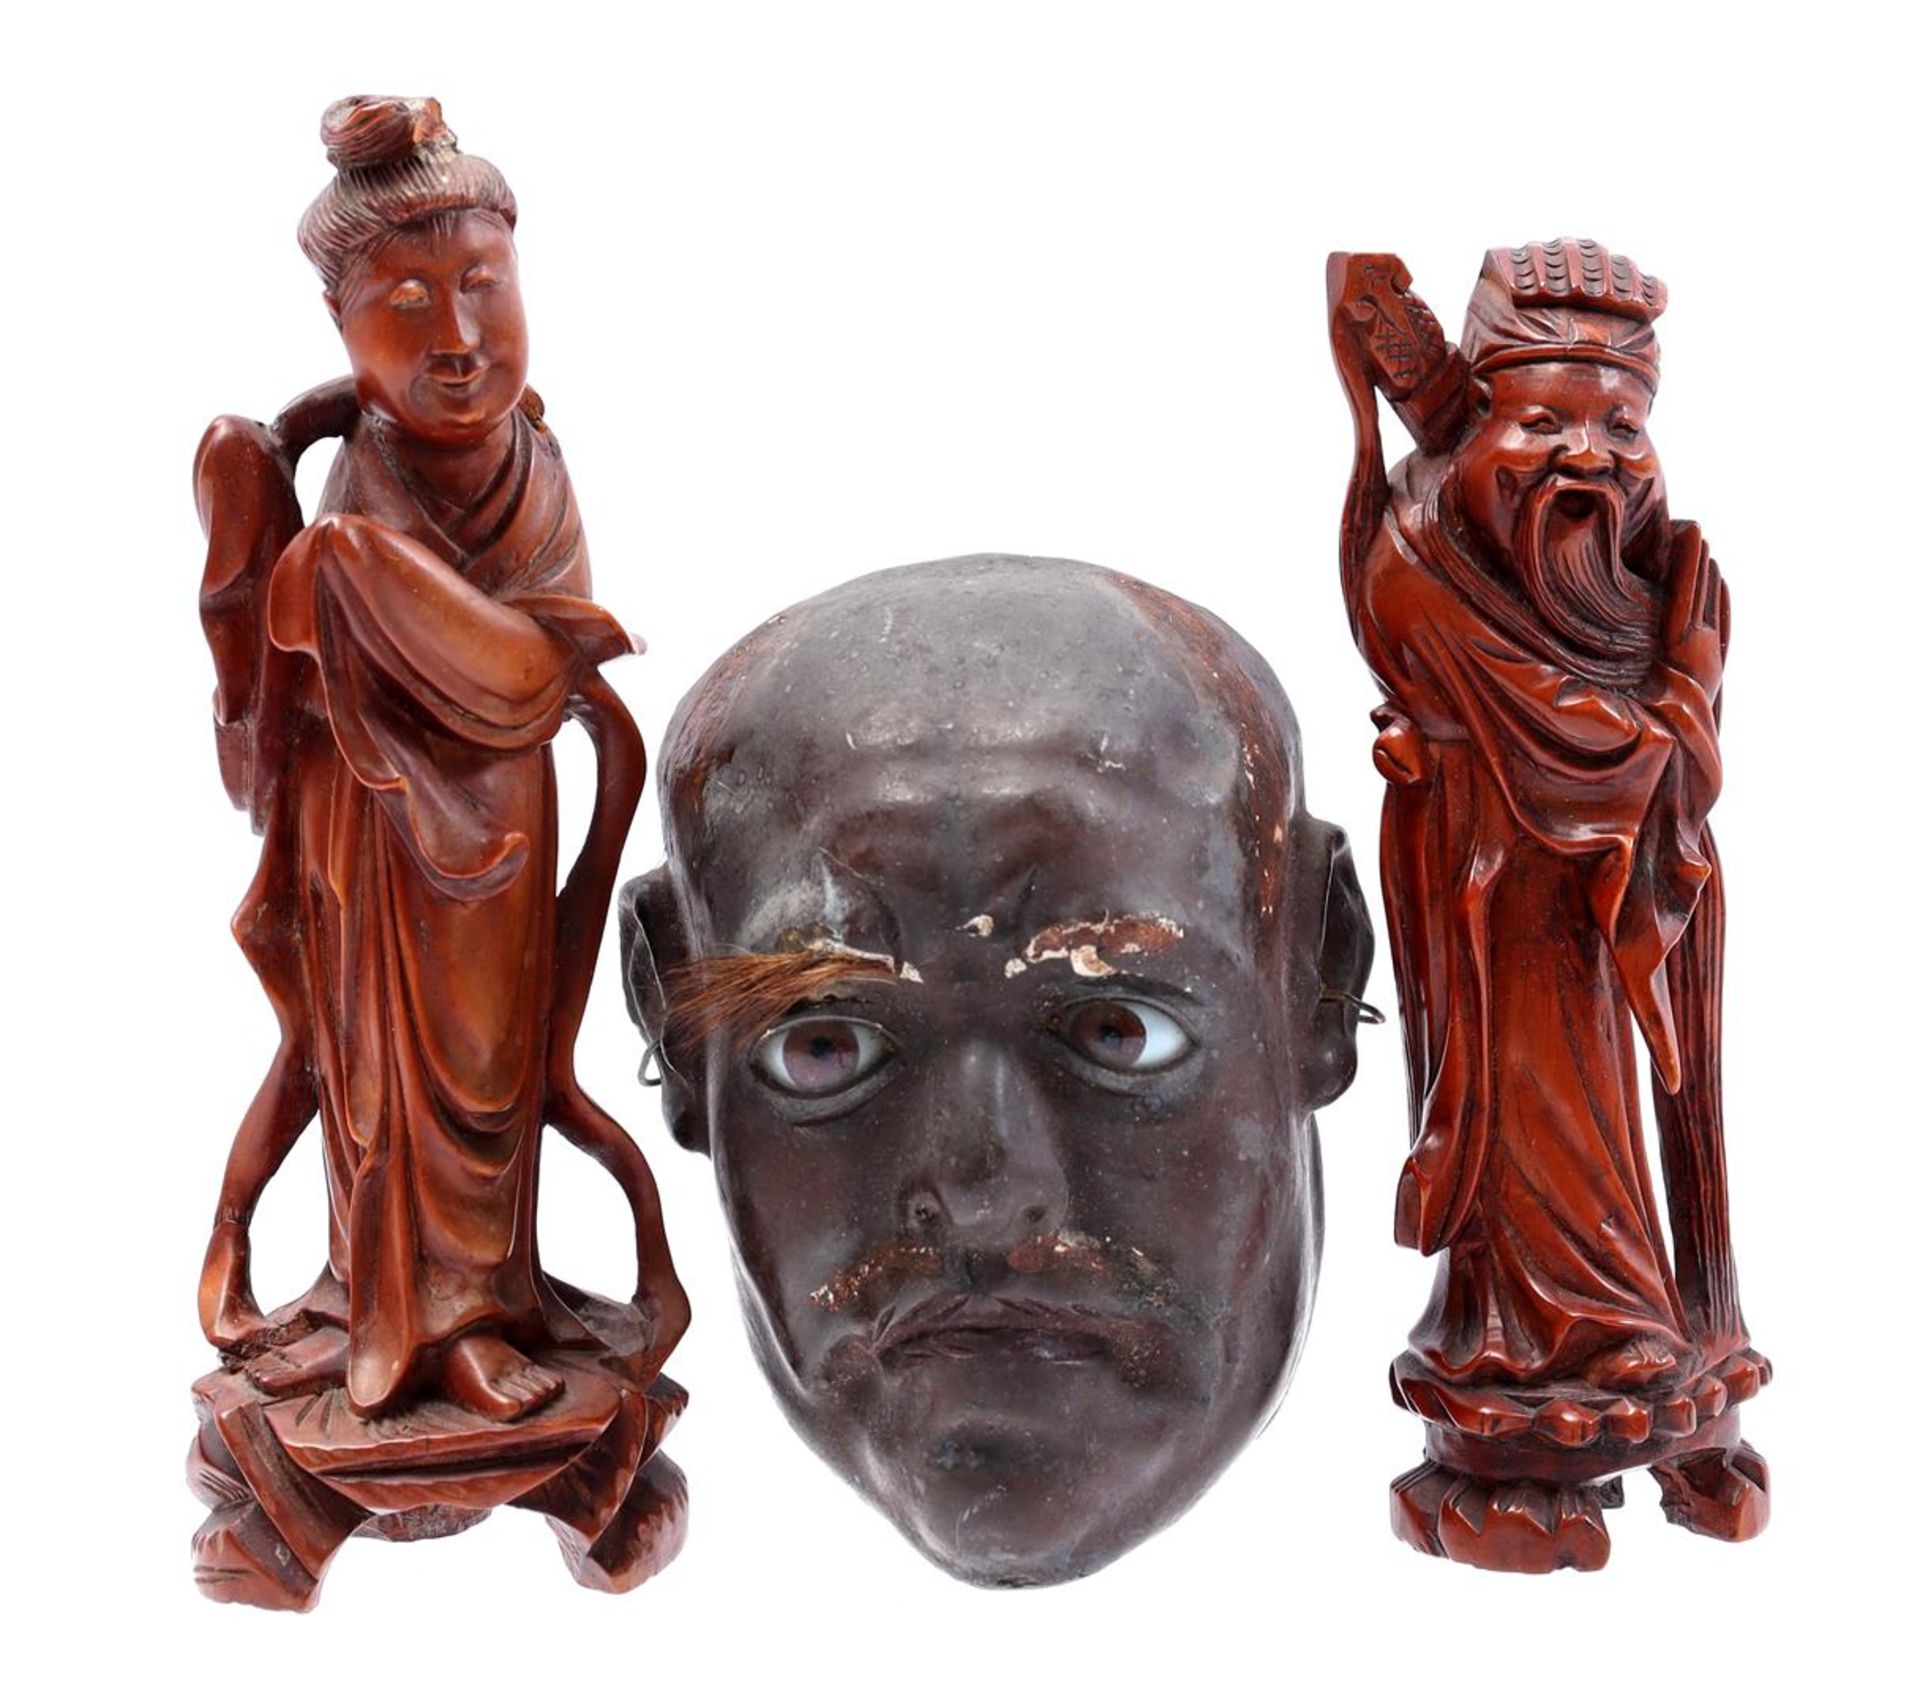 2 wooden statues and plaster mask